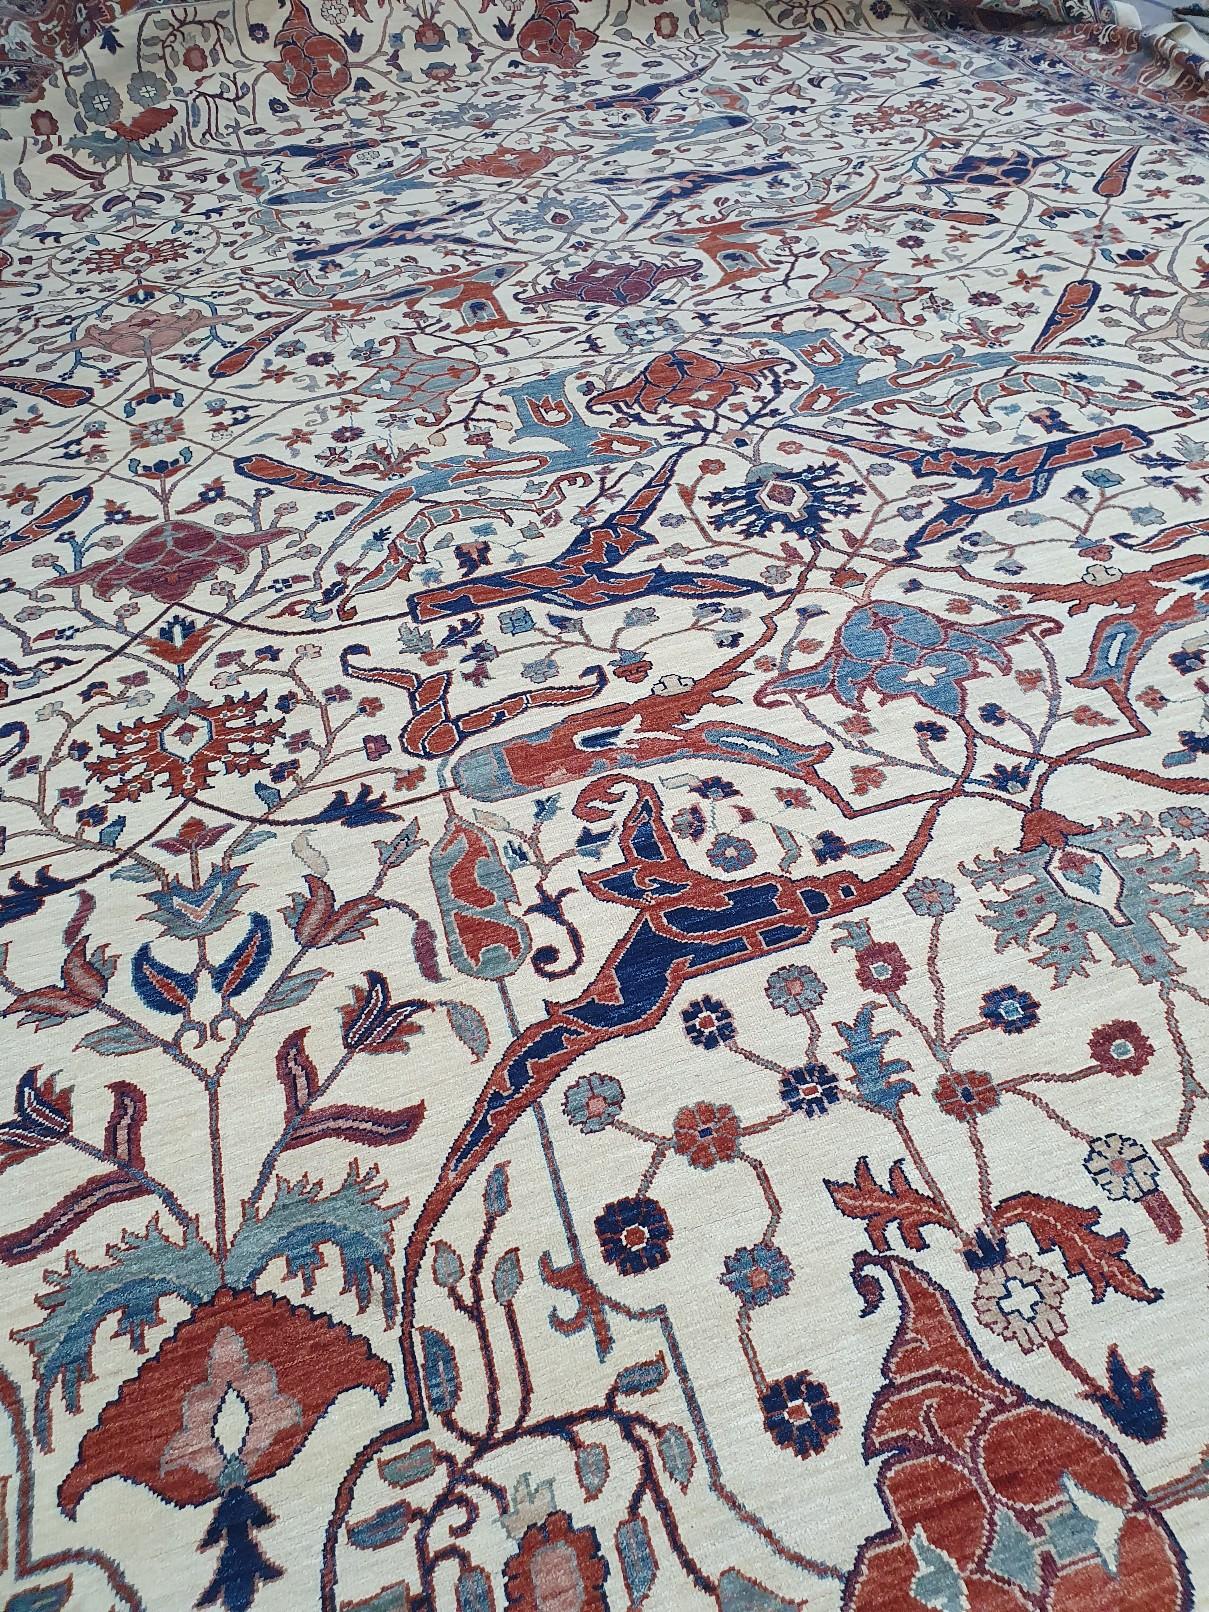 Contemporary 26 x 18 ft Palace Size Rug in Style of Farahan hand knotted 800 x 550 cm